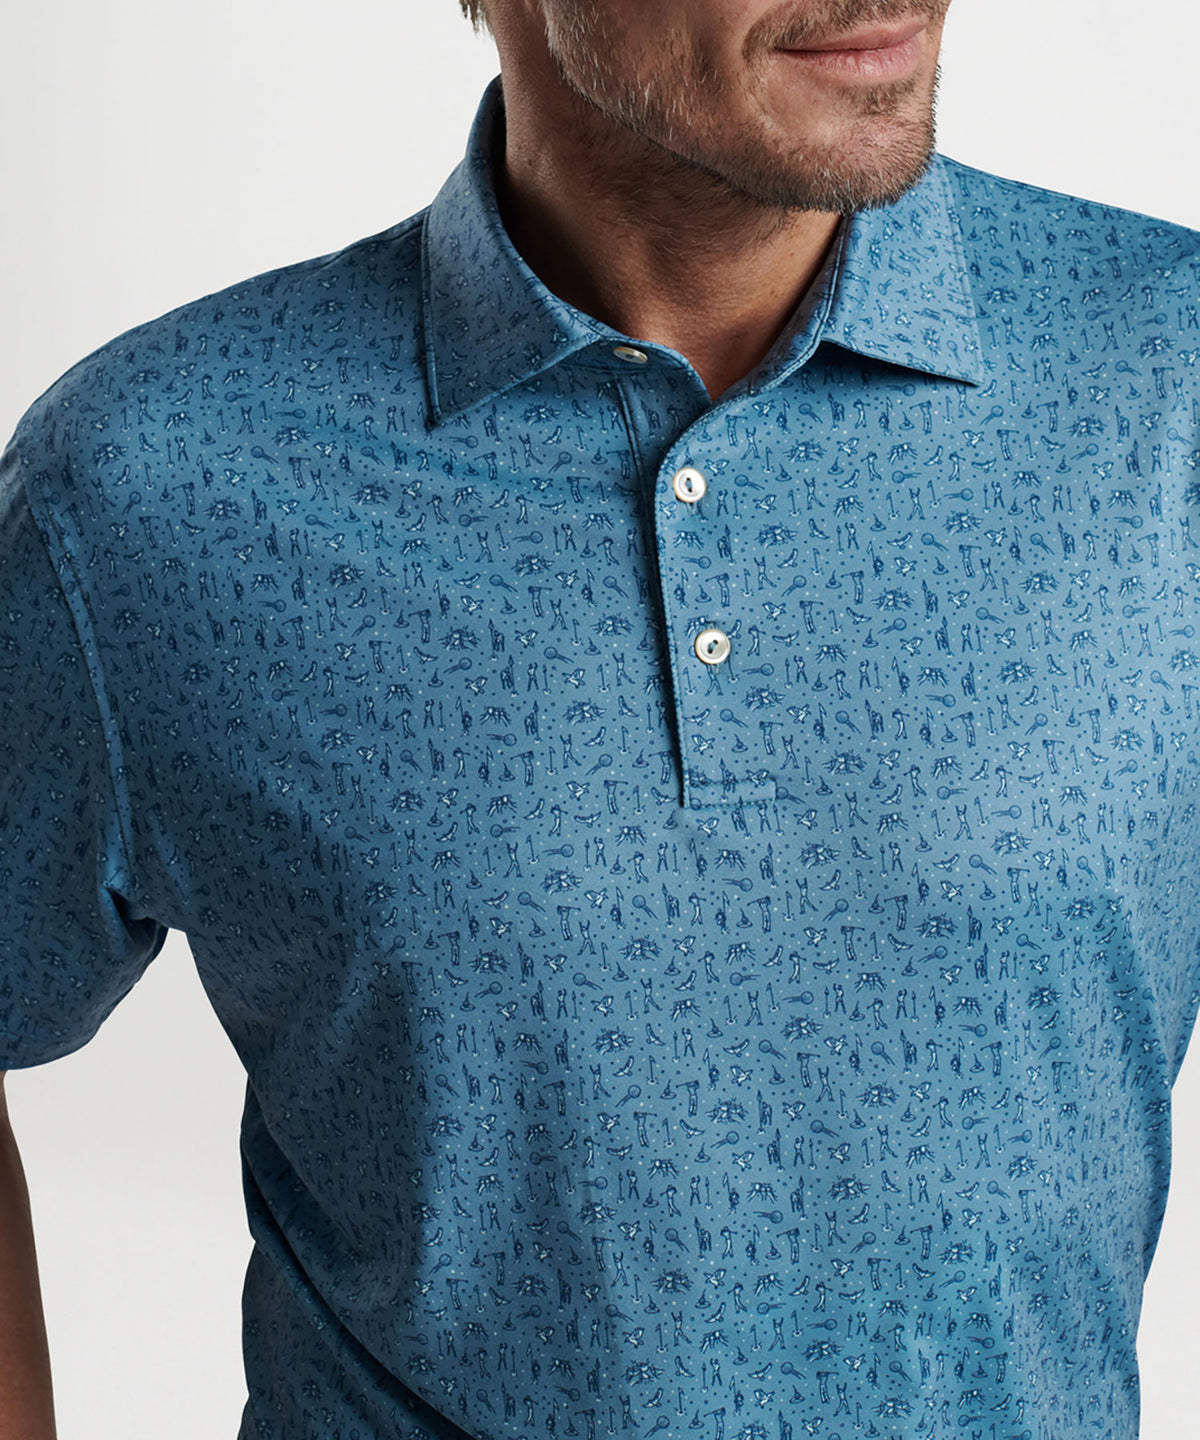 Peter Millar Short Sleeve Hole In One Print Polo